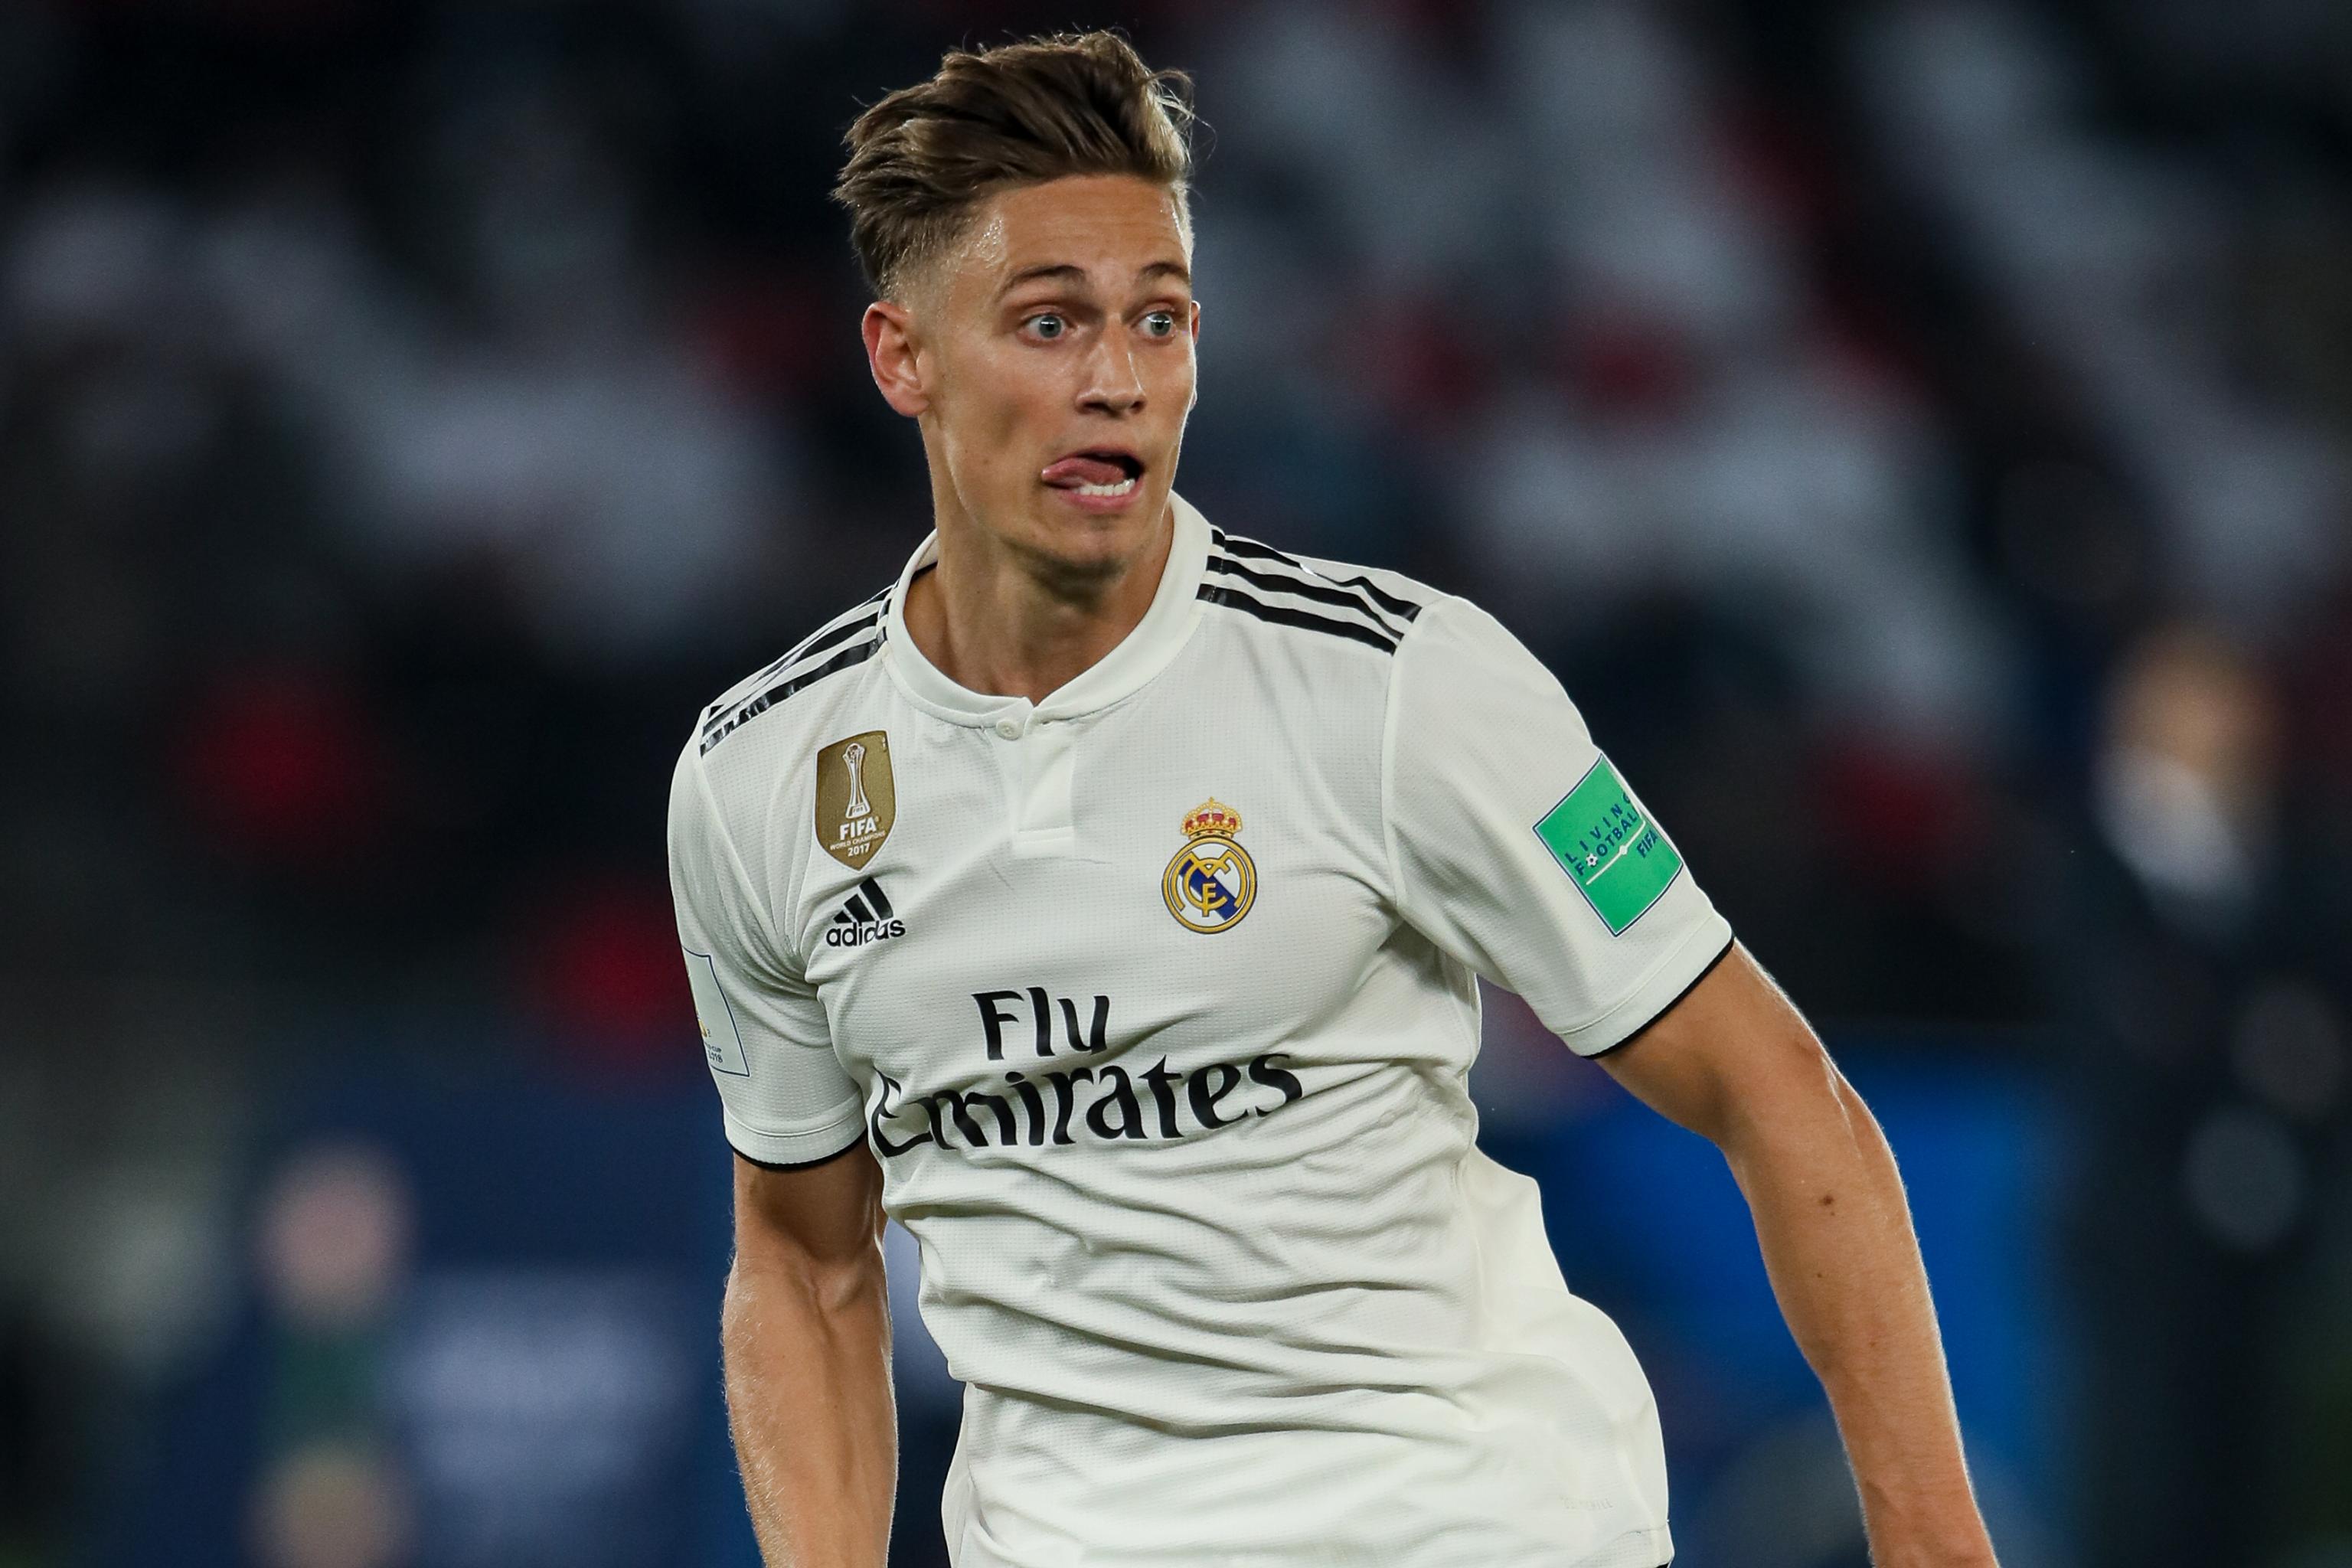 Football Mania - Marcos Llorente has made his position in Real Madrid squad  #MZ